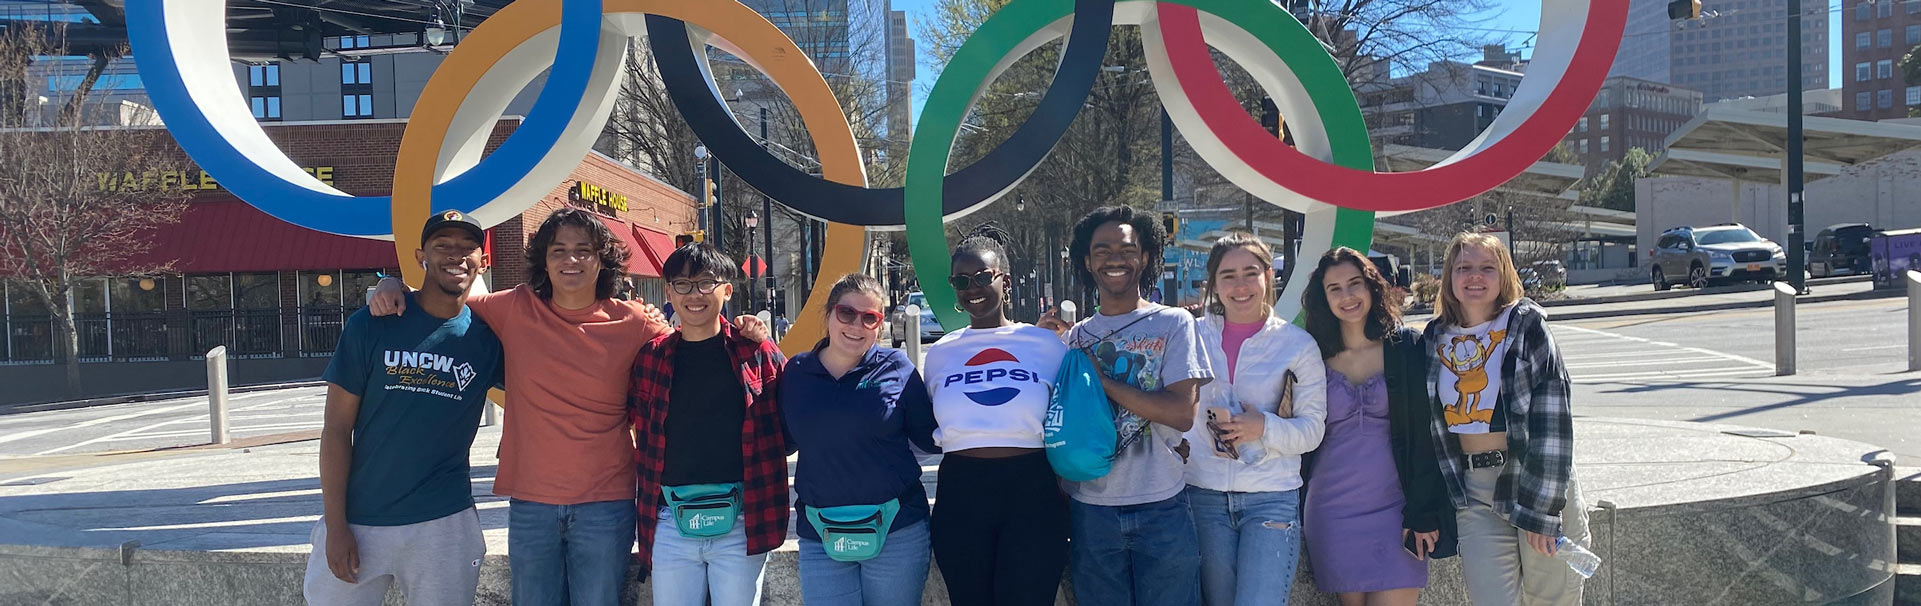 Students standing in front of the Olympic Rings